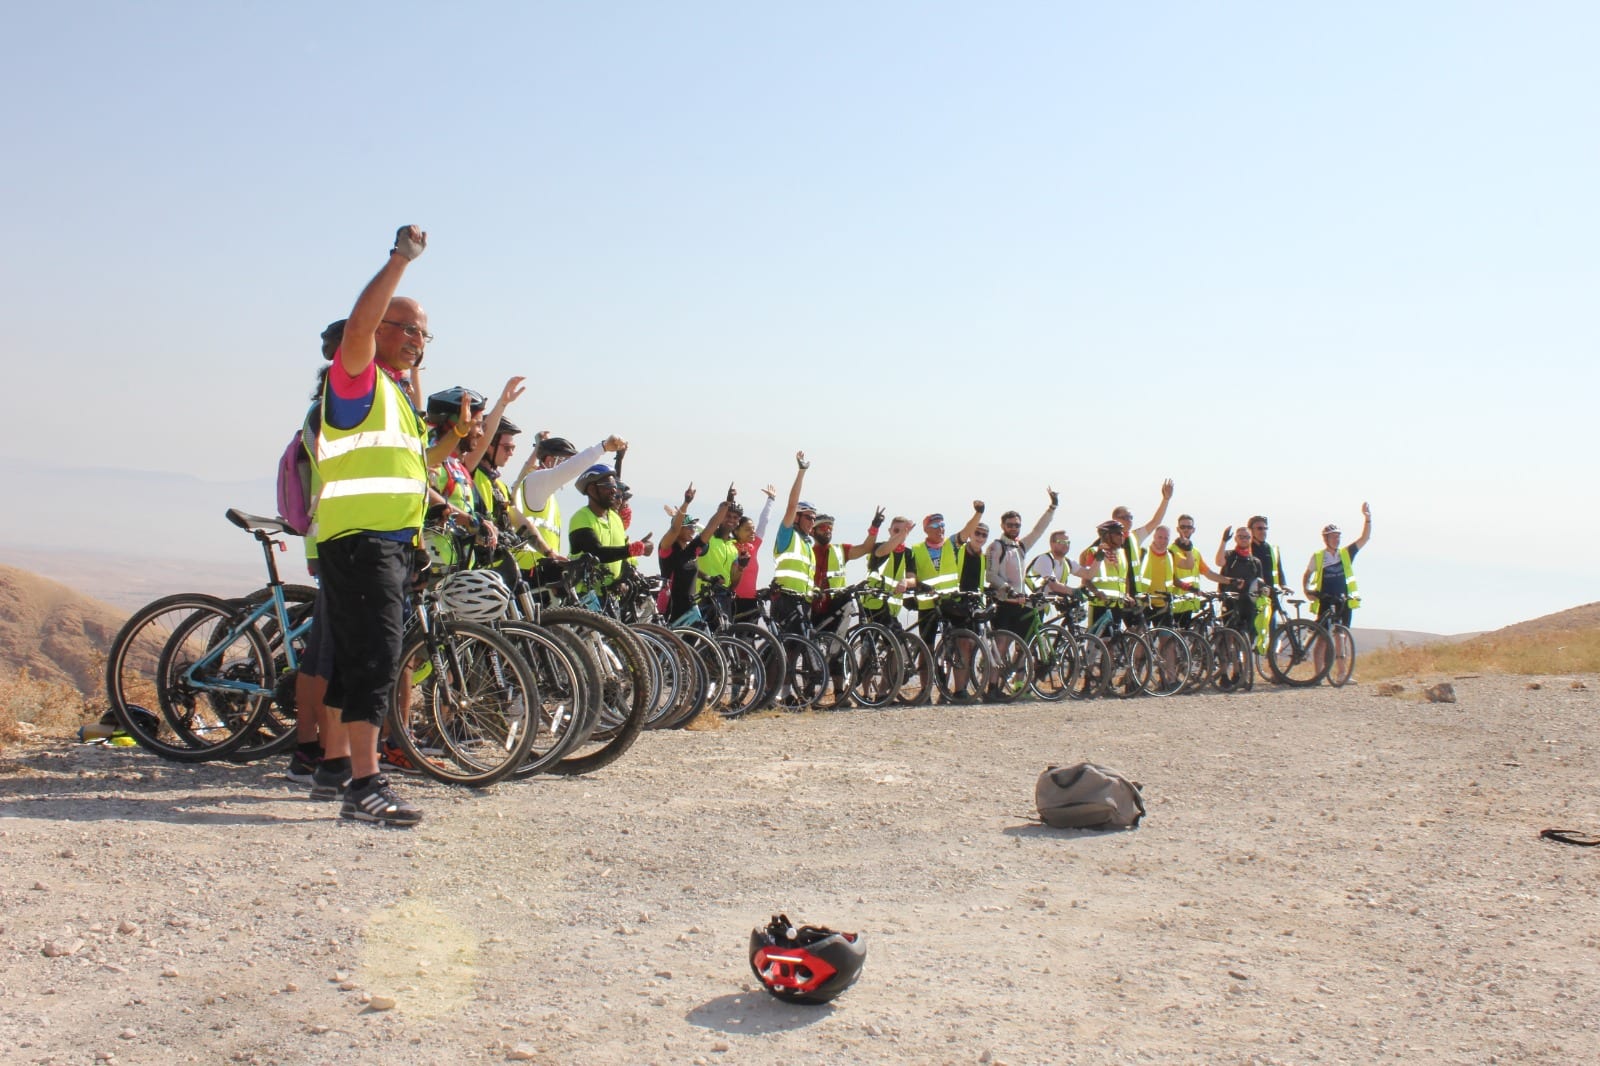 The Cycle Palestine team, who cycled 240km in aid of Medical Aid for Palestinians, from the UK to the West Bank, Palestine, between the 16-22 September 2019 [image:supplied]